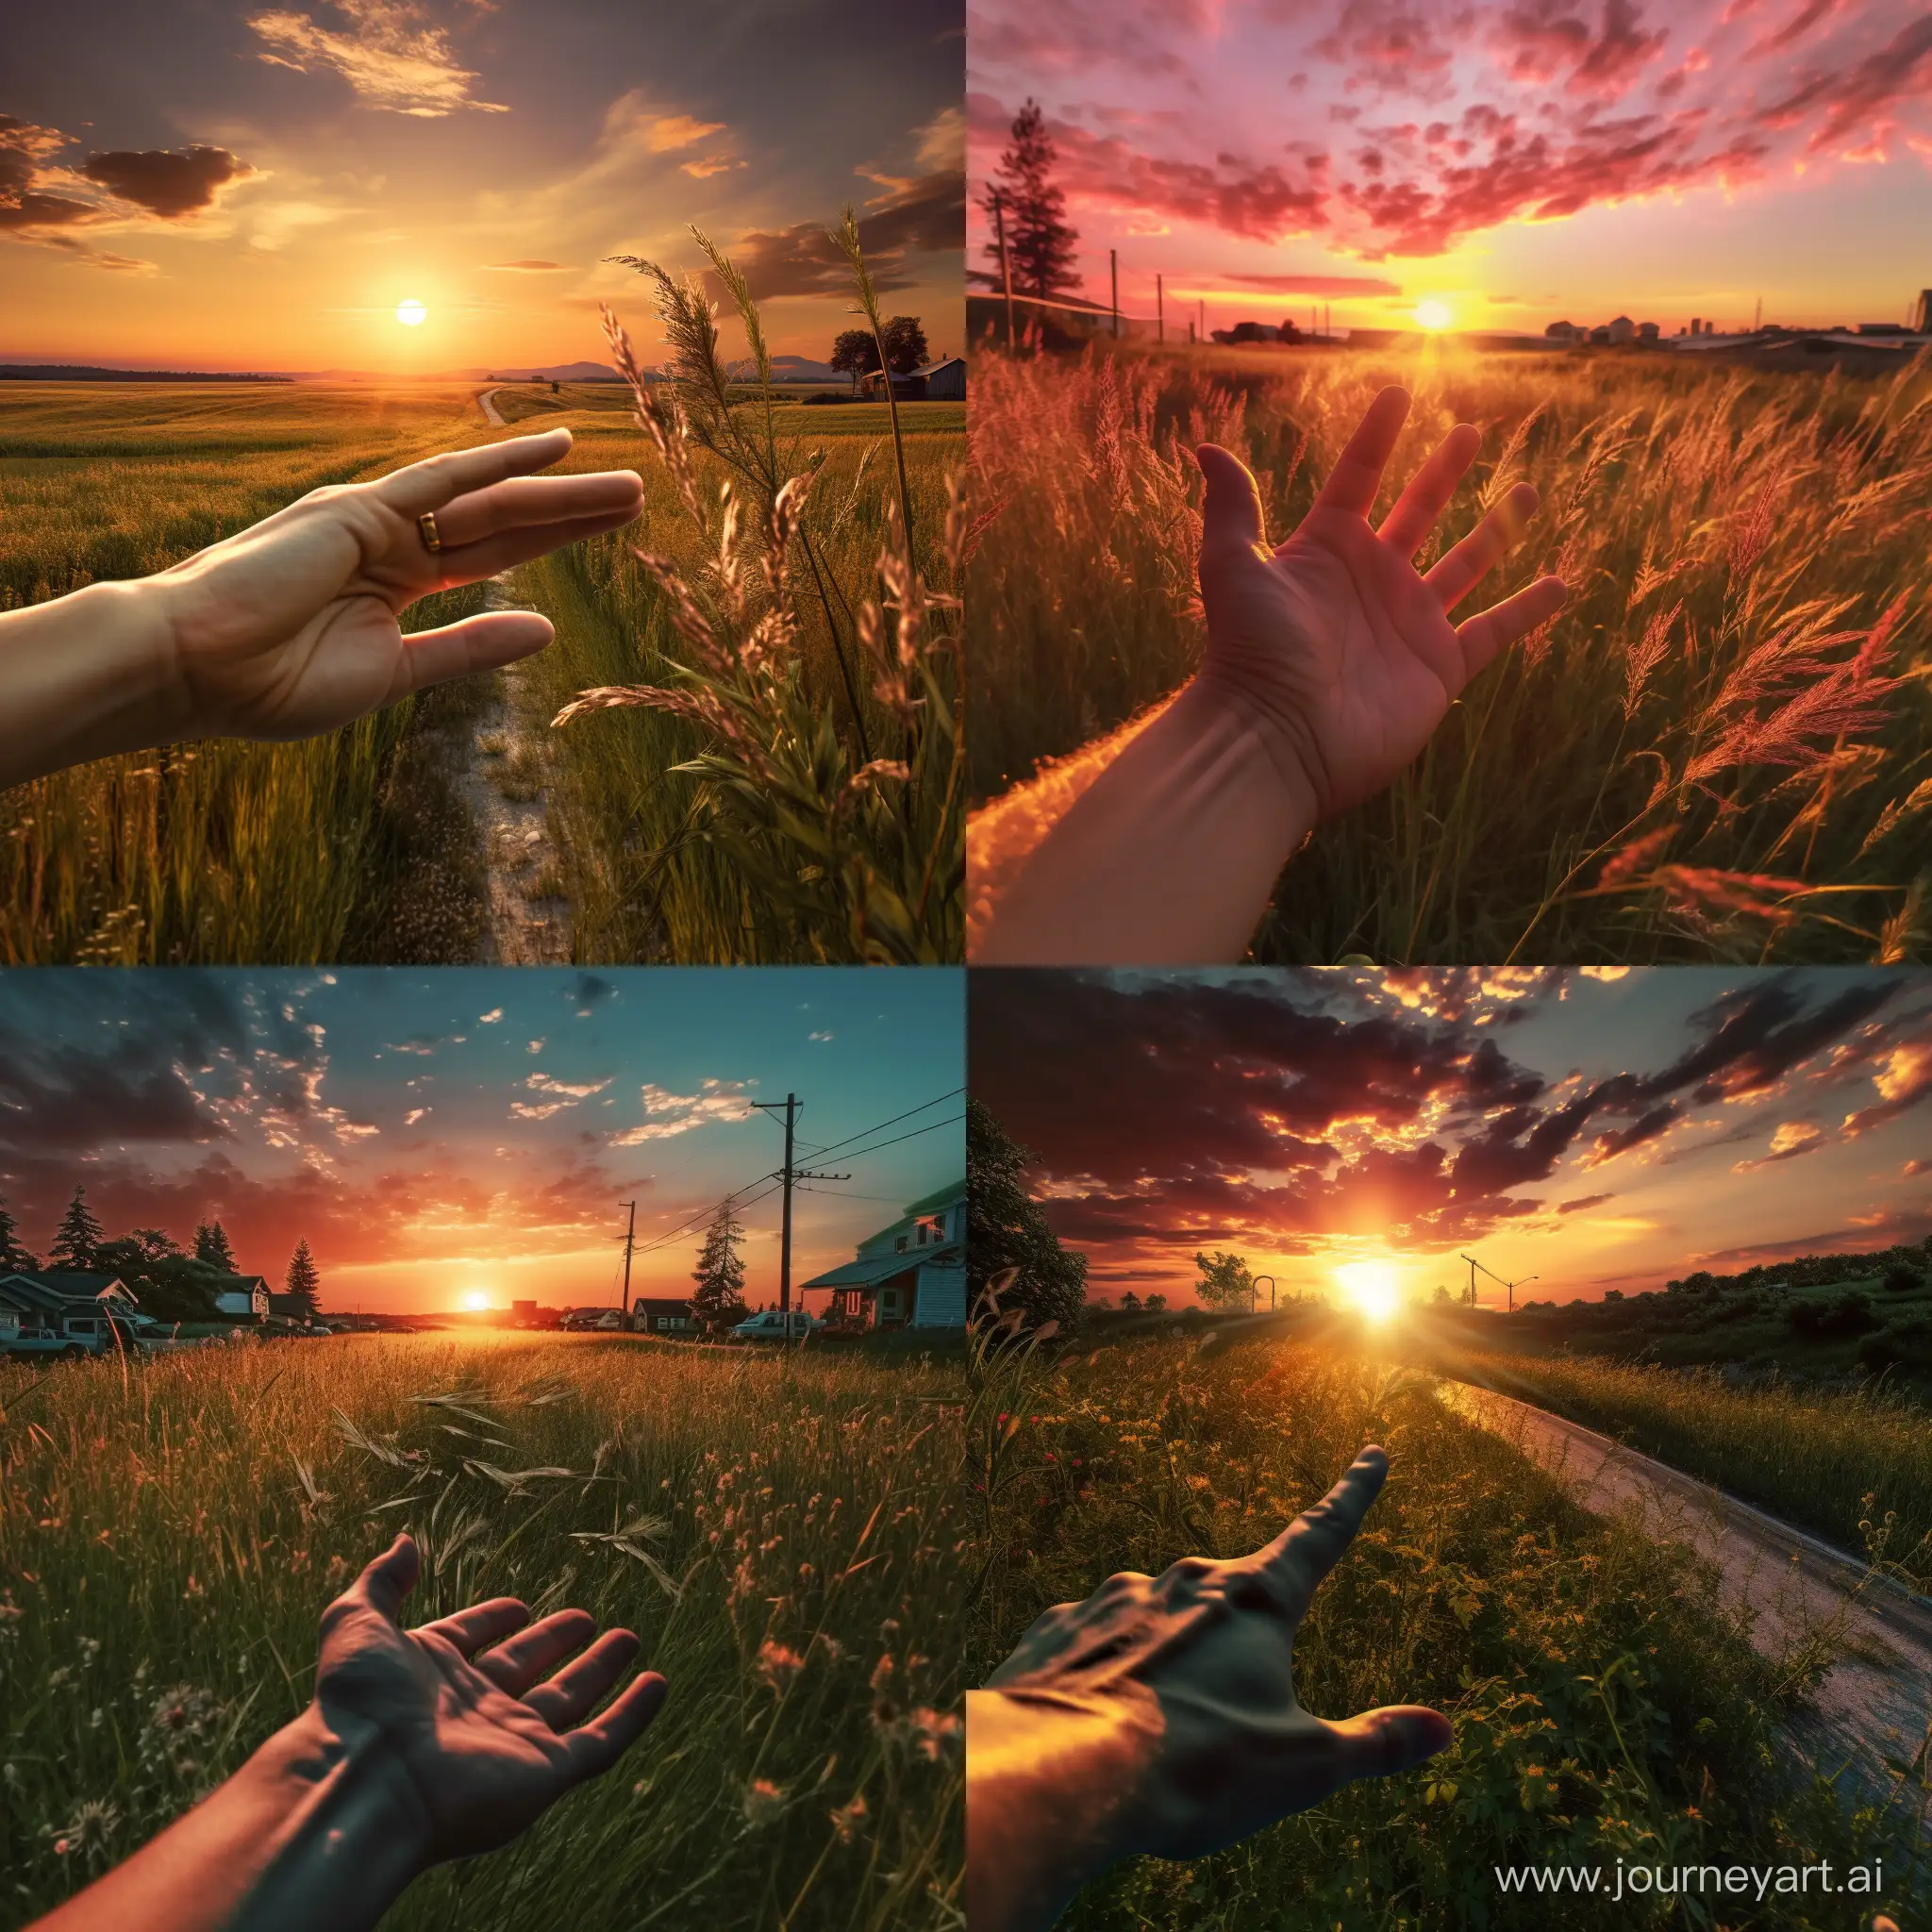 Sunset-Meadow-with-Human-Hand-Reaching-Out